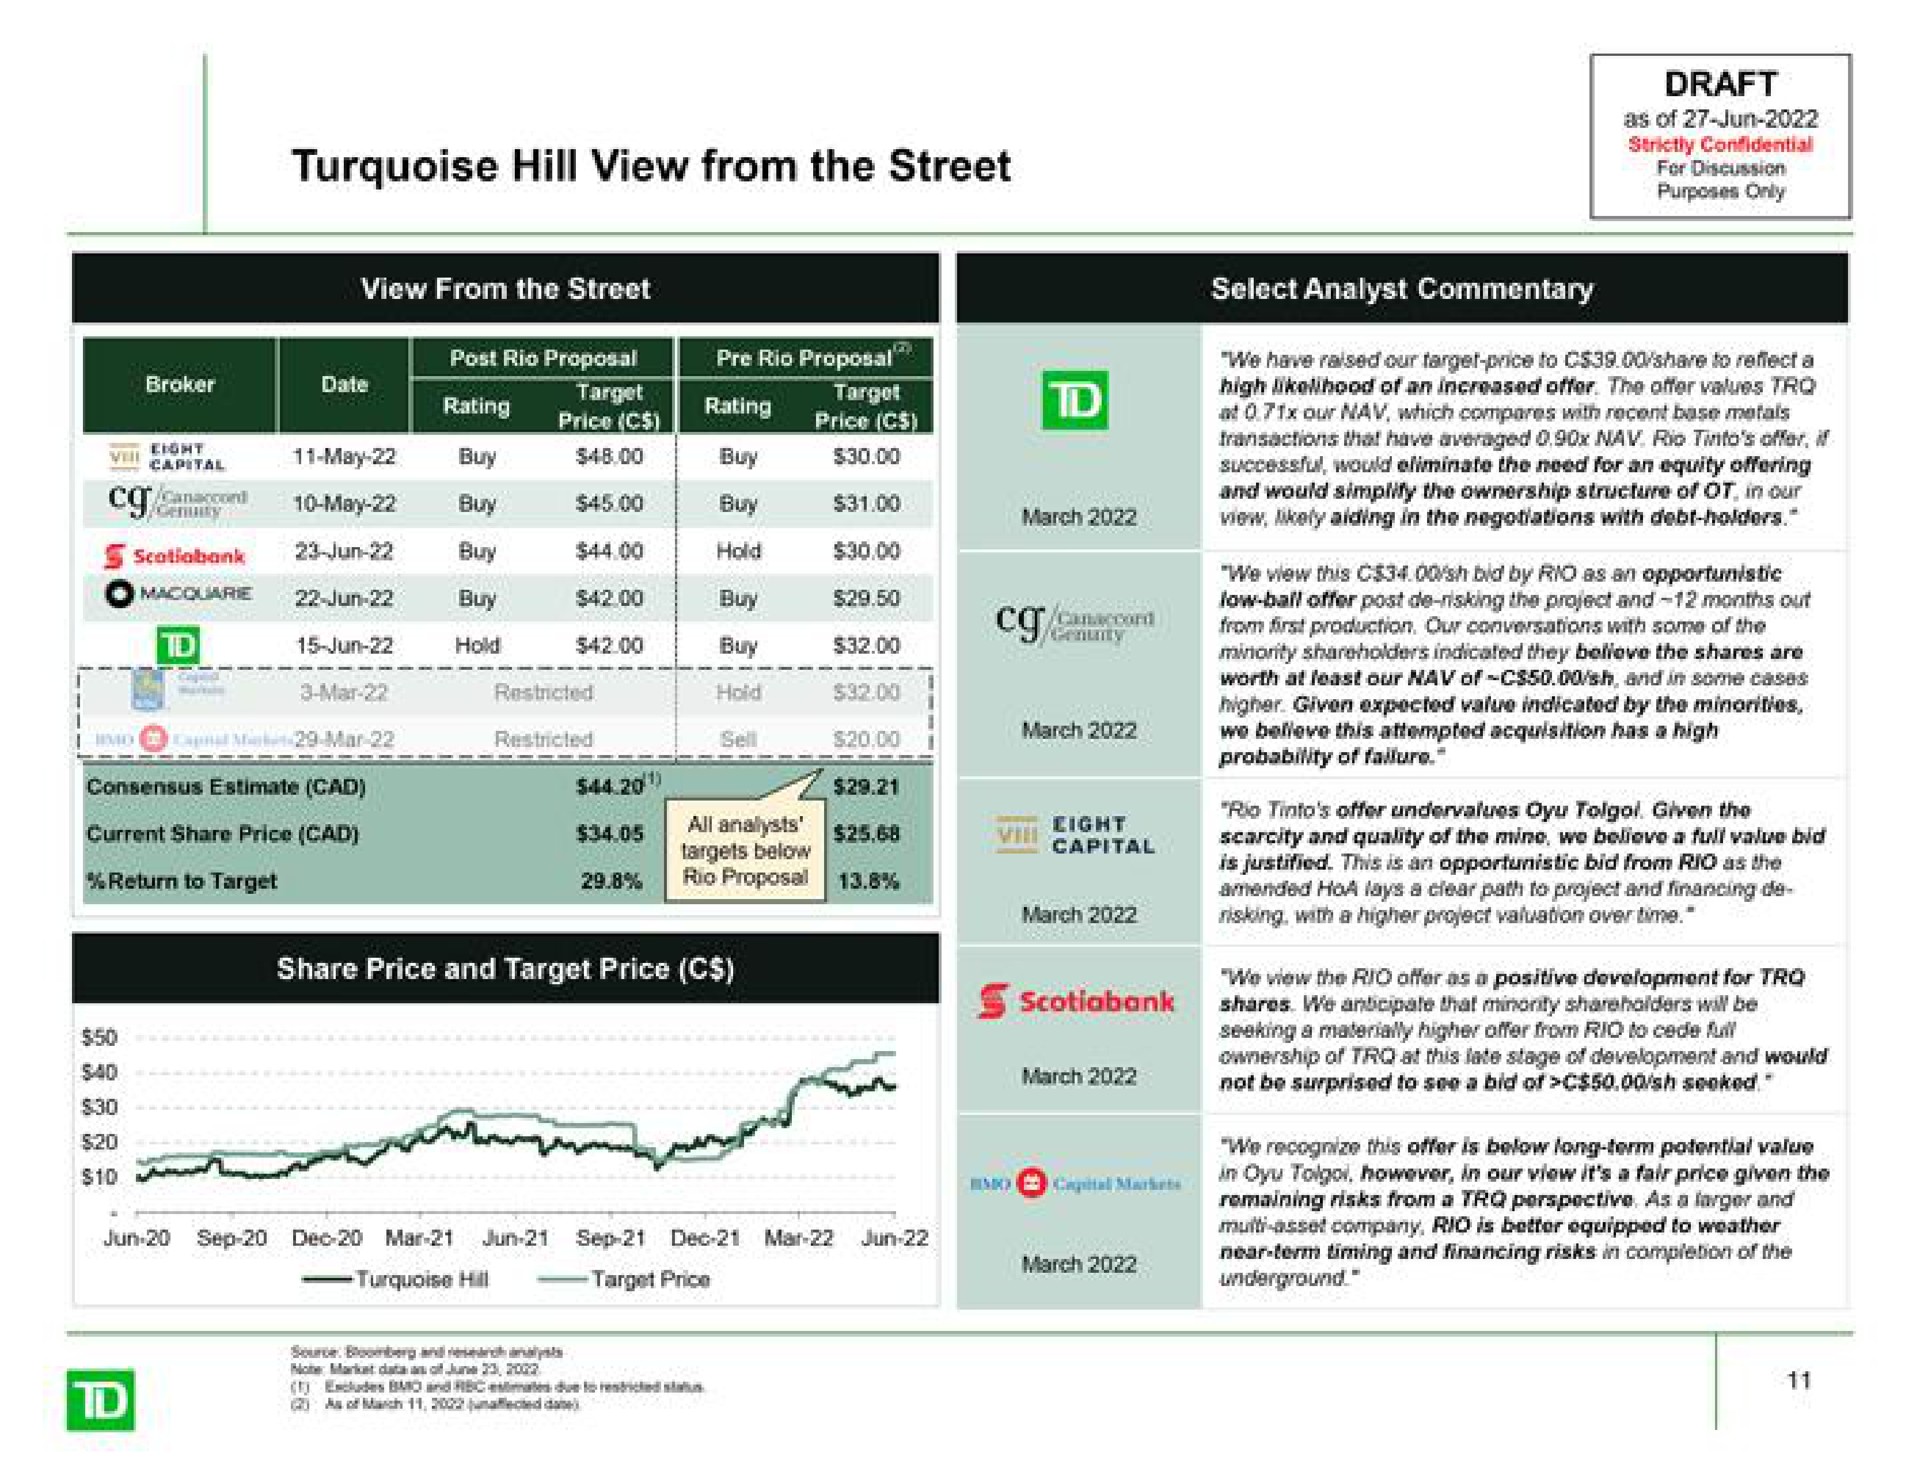 turquoise hill view from the street cee may buy buy buy buy a current share price cad gets below see march march | TD Securities